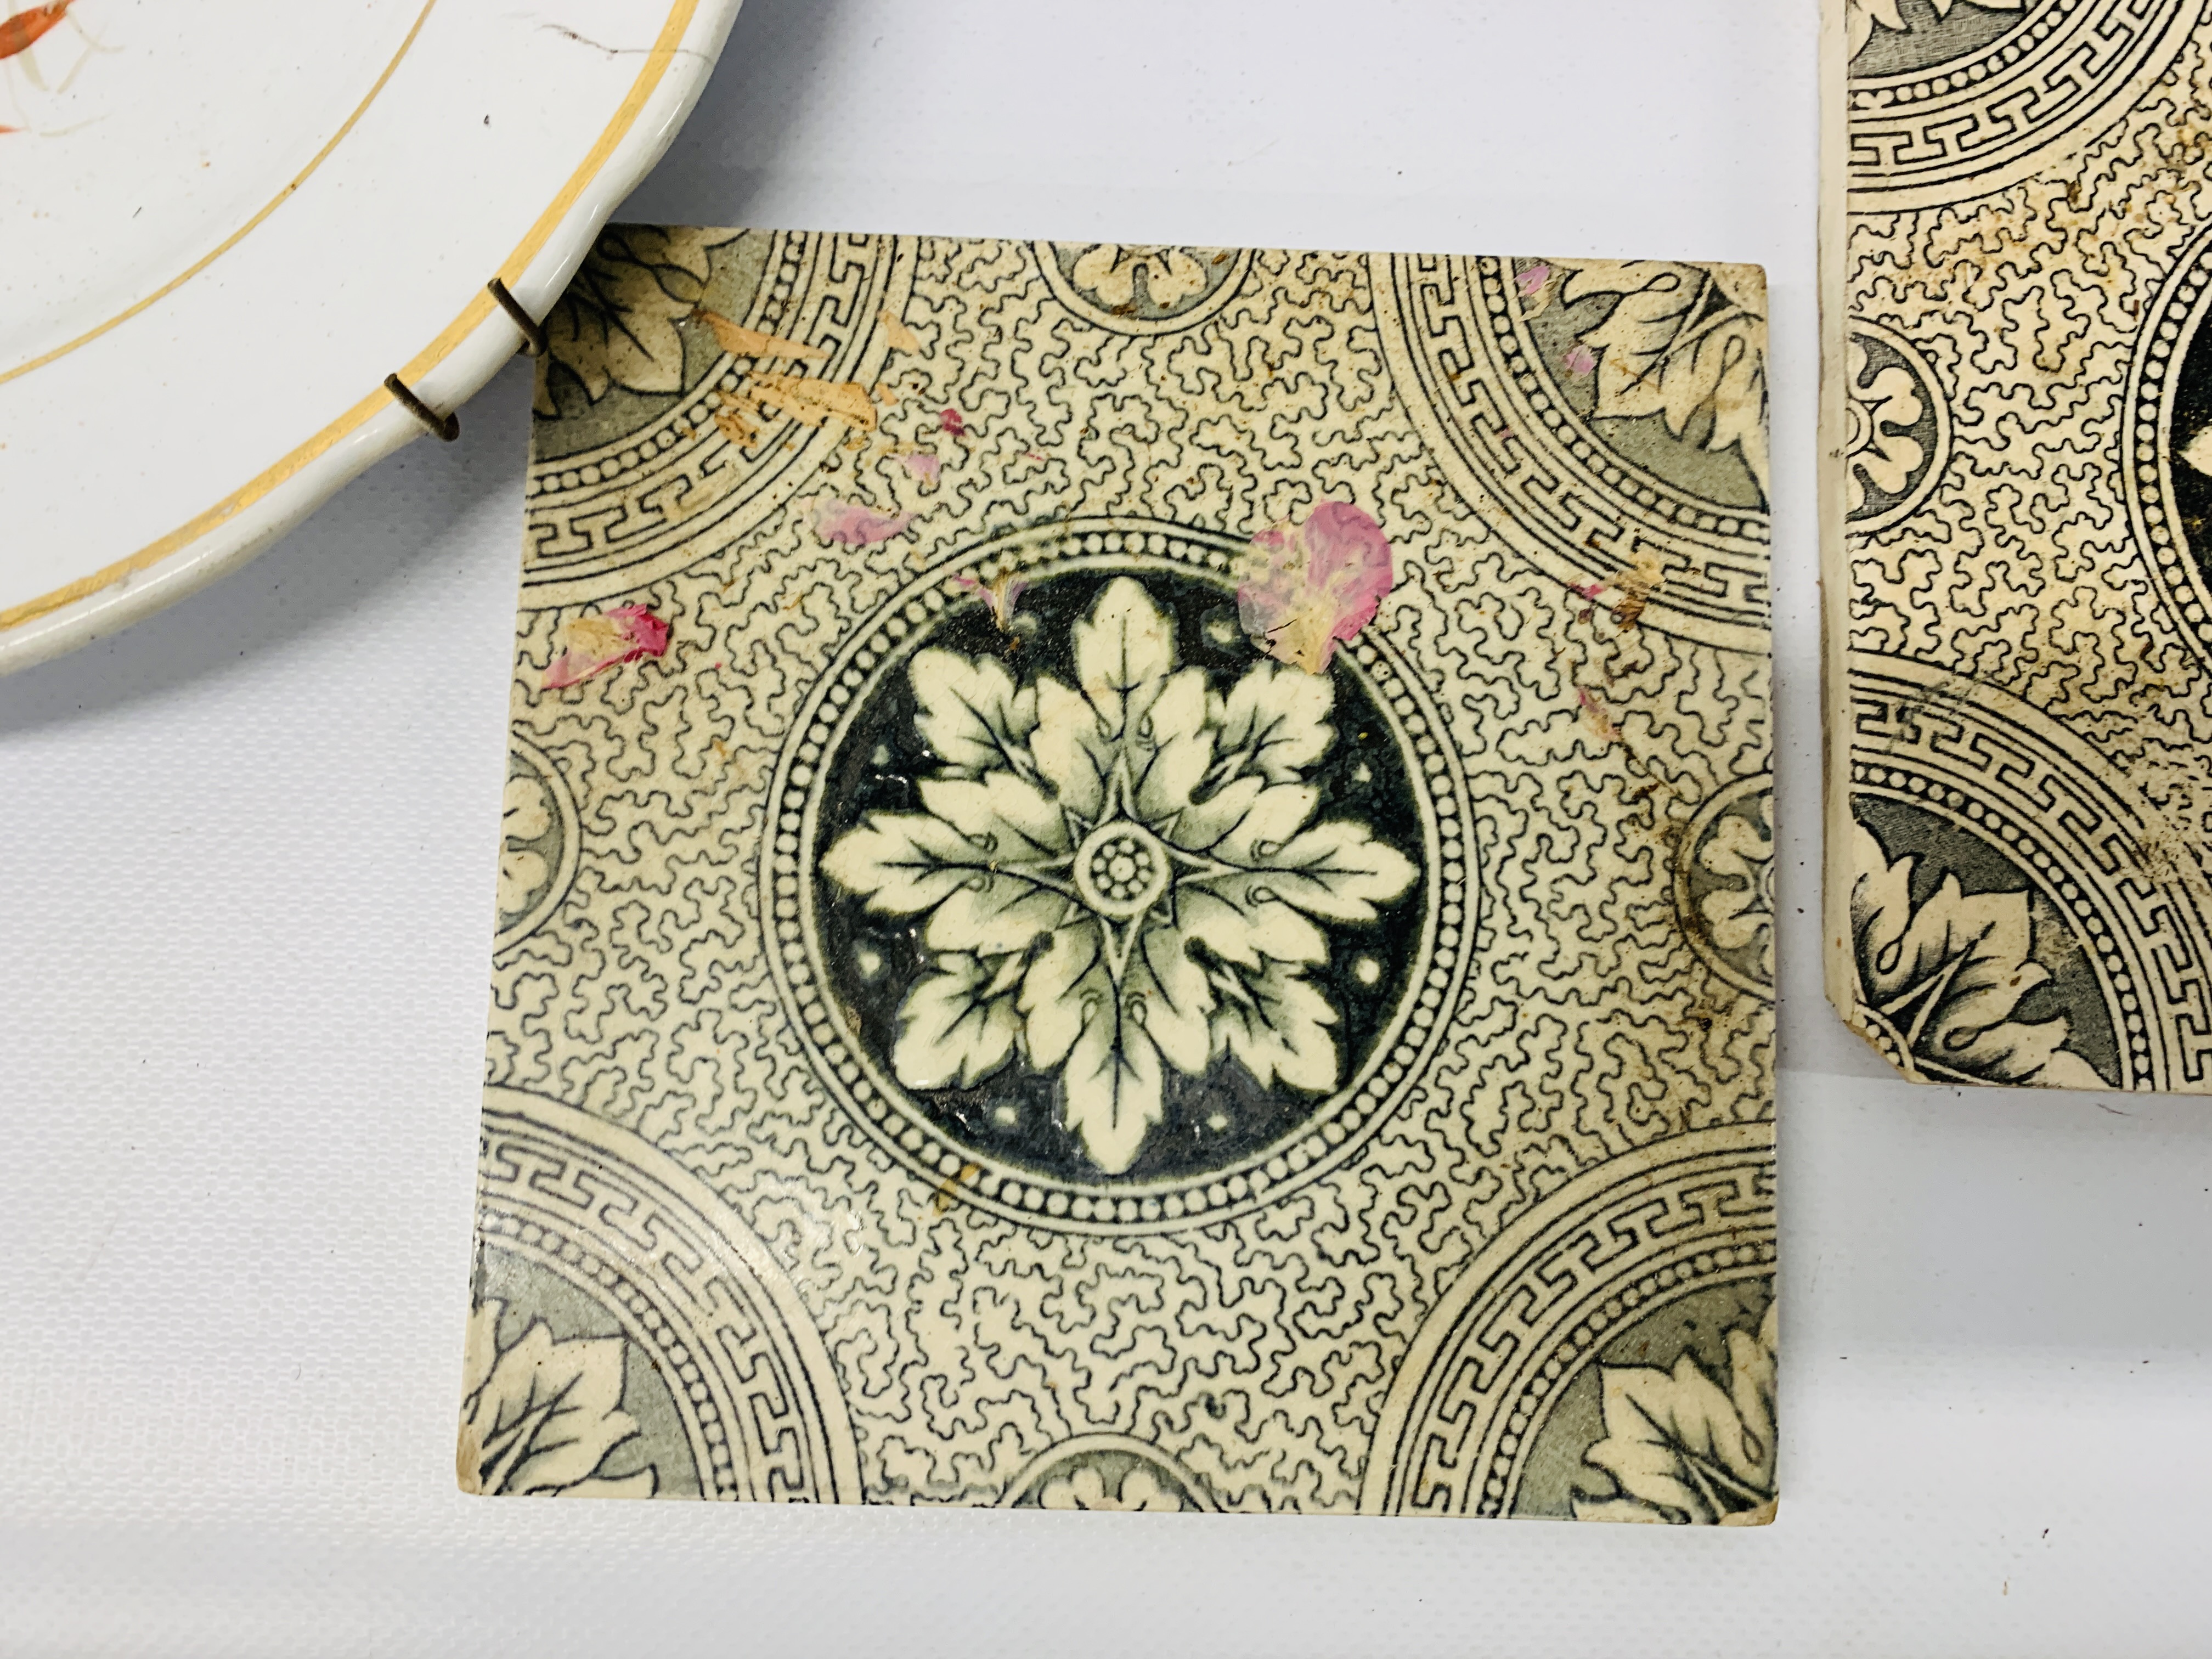 MASONS IRONSTONE MEAT DISH DIAMETER 52cm, FOUR VINTAGE PATTERNED TILES, TWO ORIENTAL VASES, - Image 23 of 29